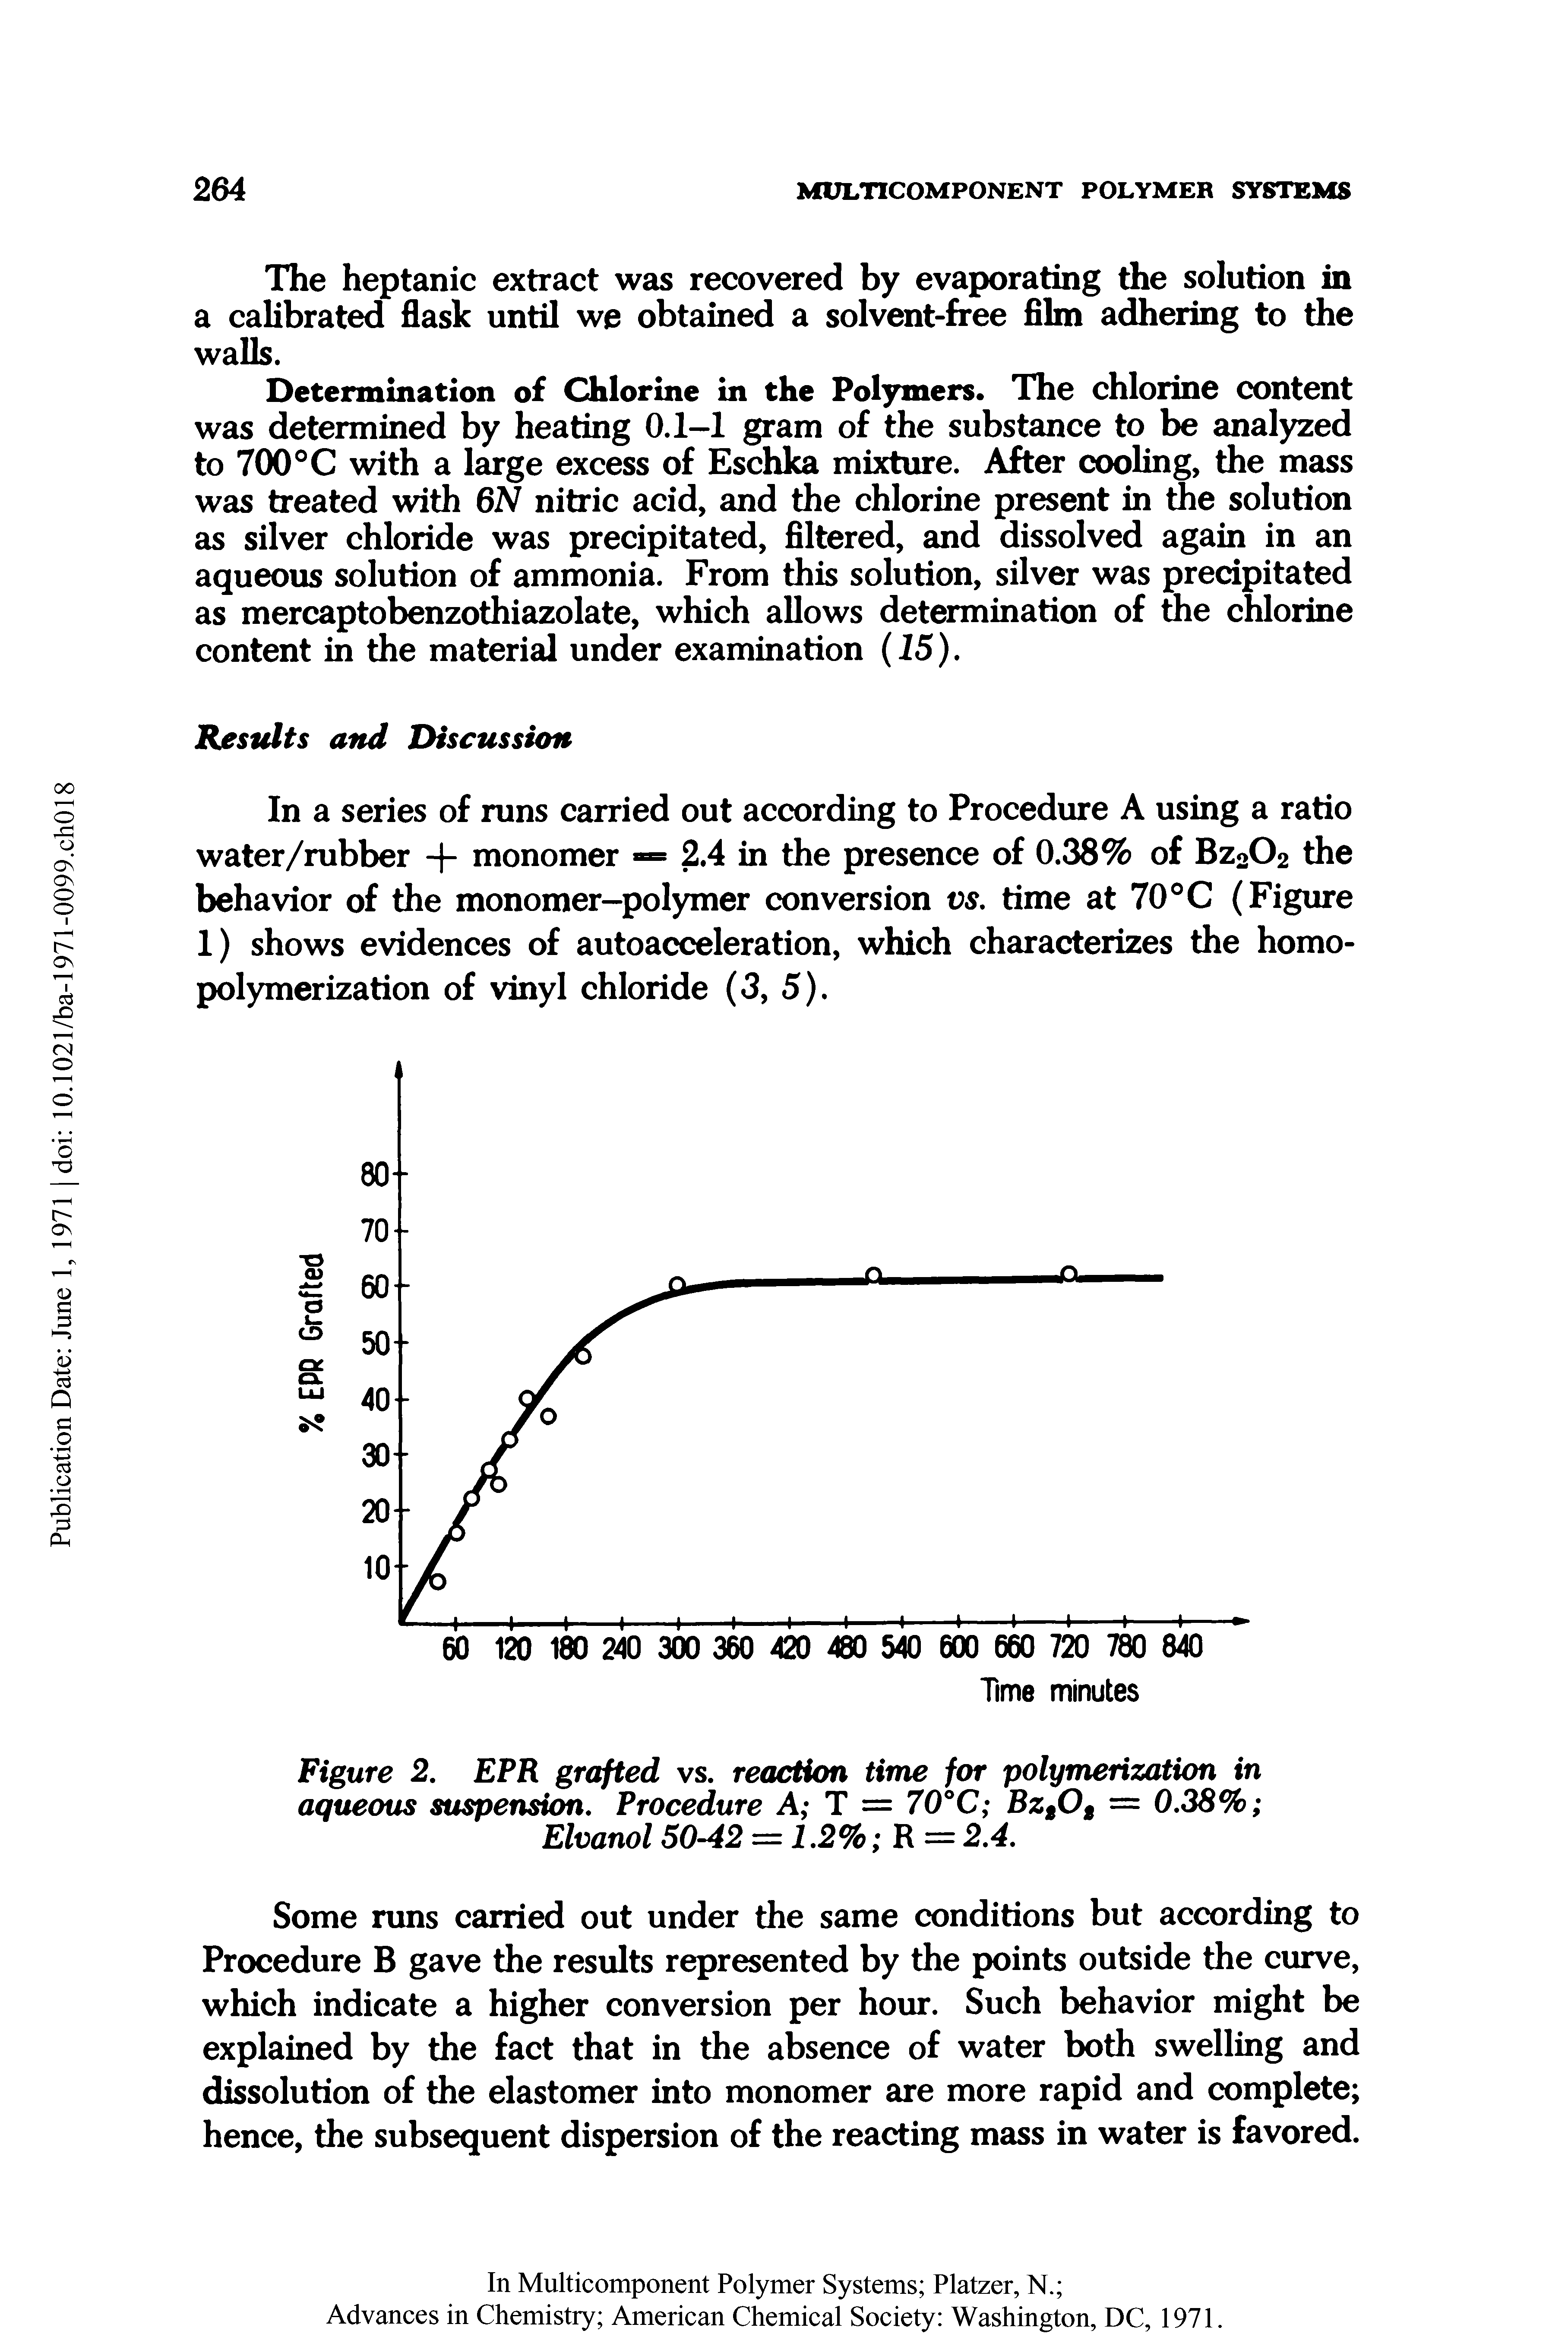 Figure 2. EPR grafted vs. reaction time for polymerization in aqueous suspension. Procedure A T = 70°C BztOt = 0.38% ...